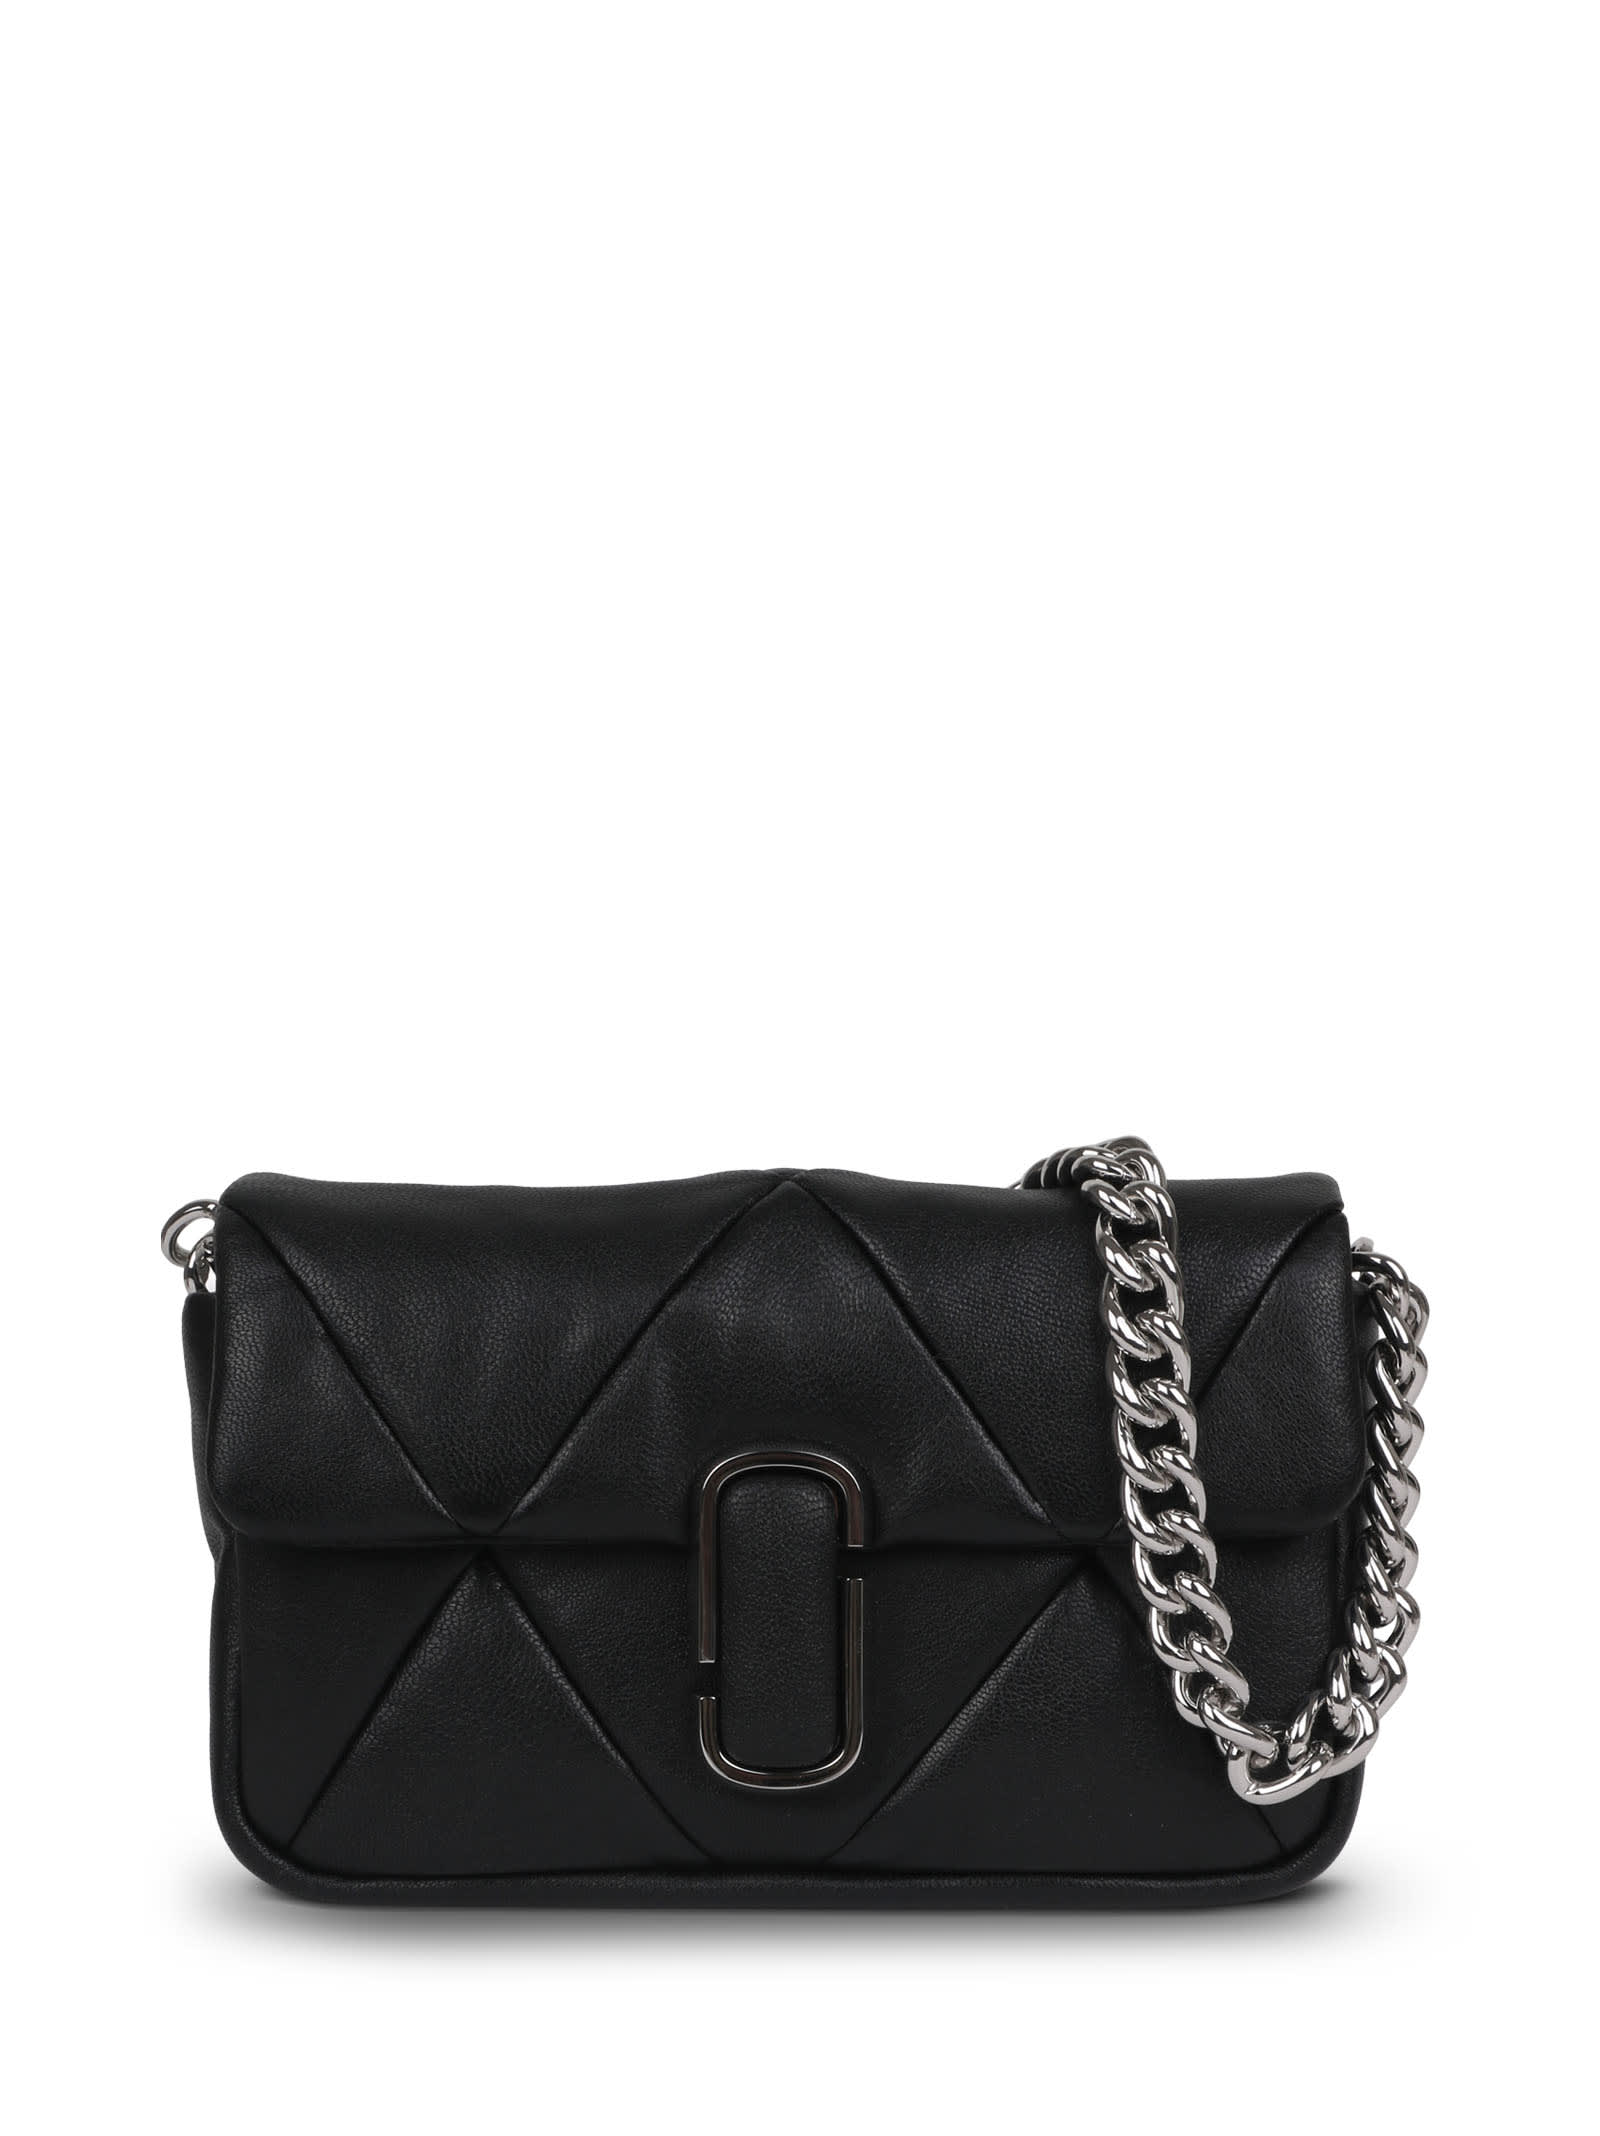 MARC JACOBS The Puffy Diamond Quilted J Marc Shoulder Bag